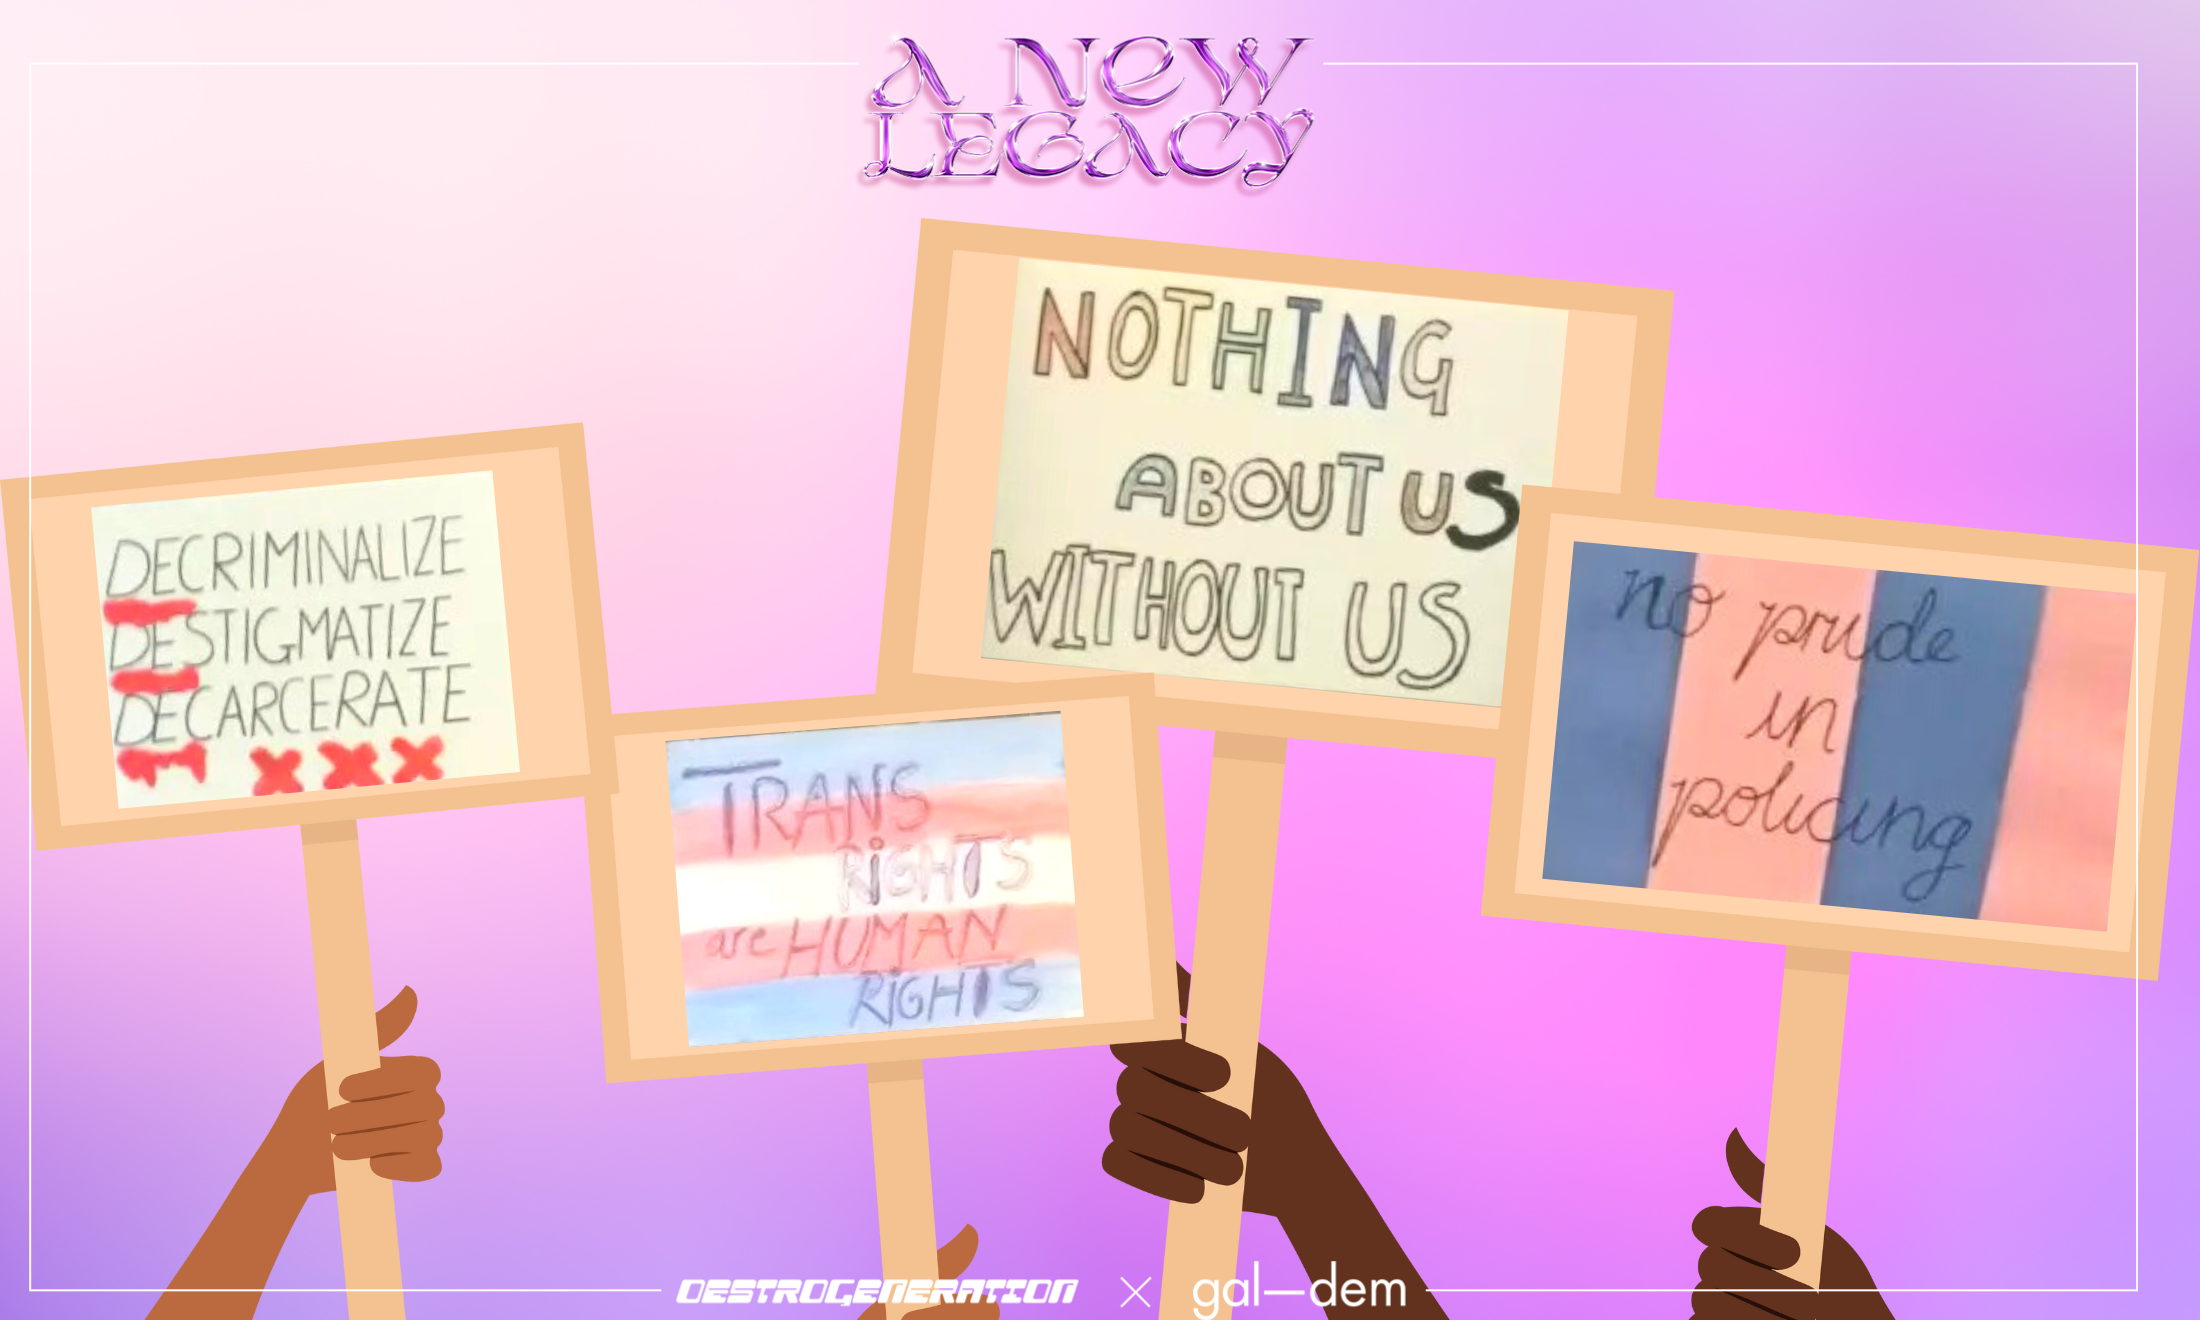 Advocating for autonomy: trans and sex workers rights have always gone hand in hand